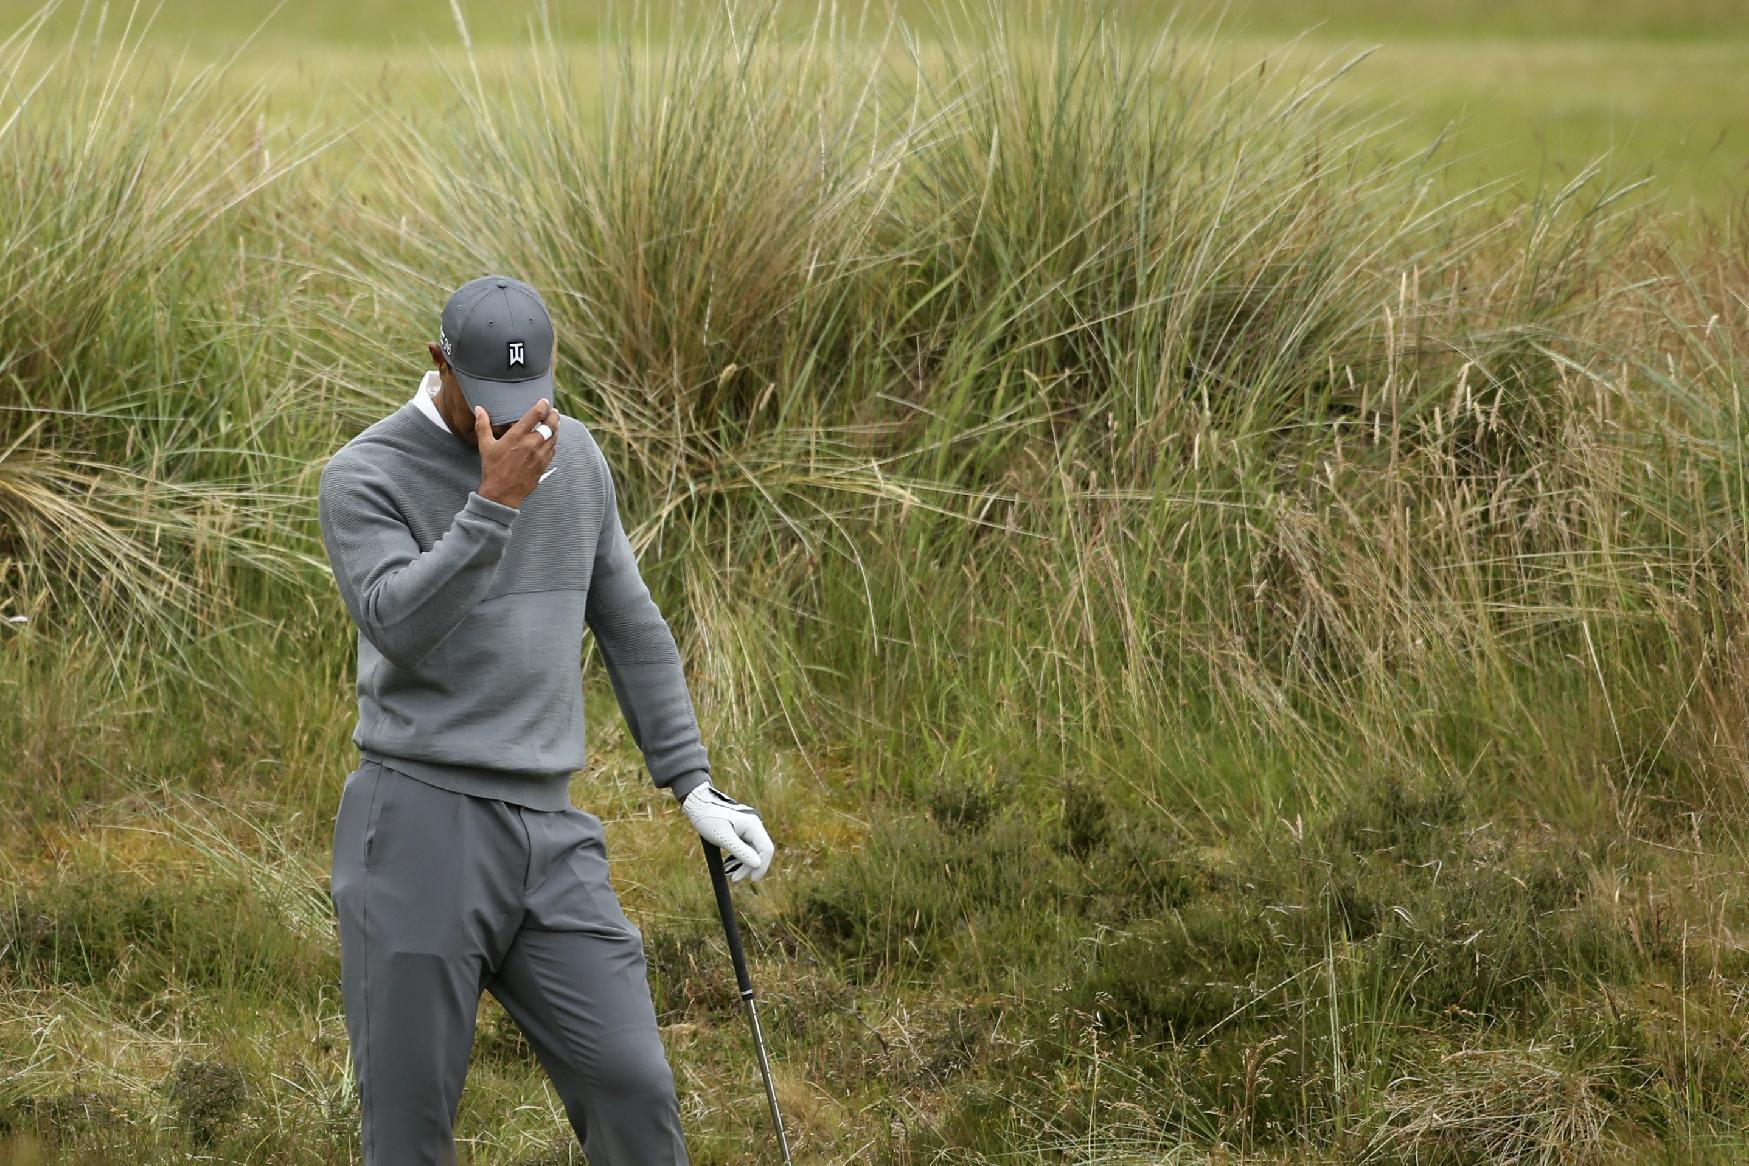 United States' Tiger Woods prepares to take a shot from the rough on the fifth hole during the first round of the British Open Golf Championship at the Old Course, St. Andrews, Scotland, Thursday, July 16, 2015. (AP Photo/Peter Morrison)